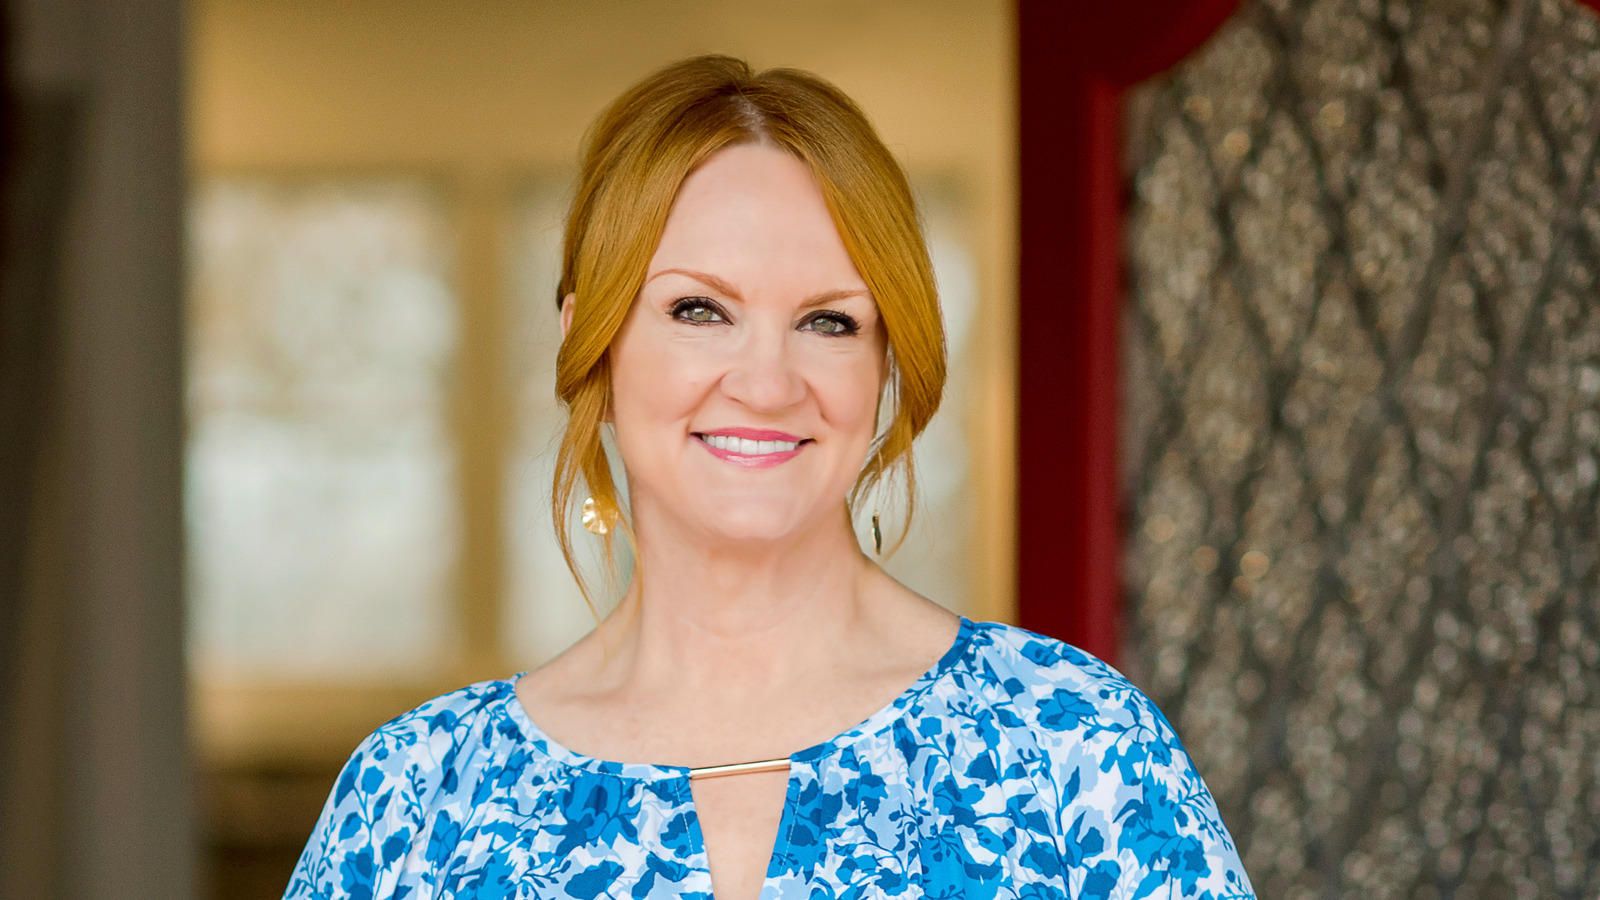 Ree Drummond talks about her new cookbook, Life as an Empty Nest… – The Tasting Table